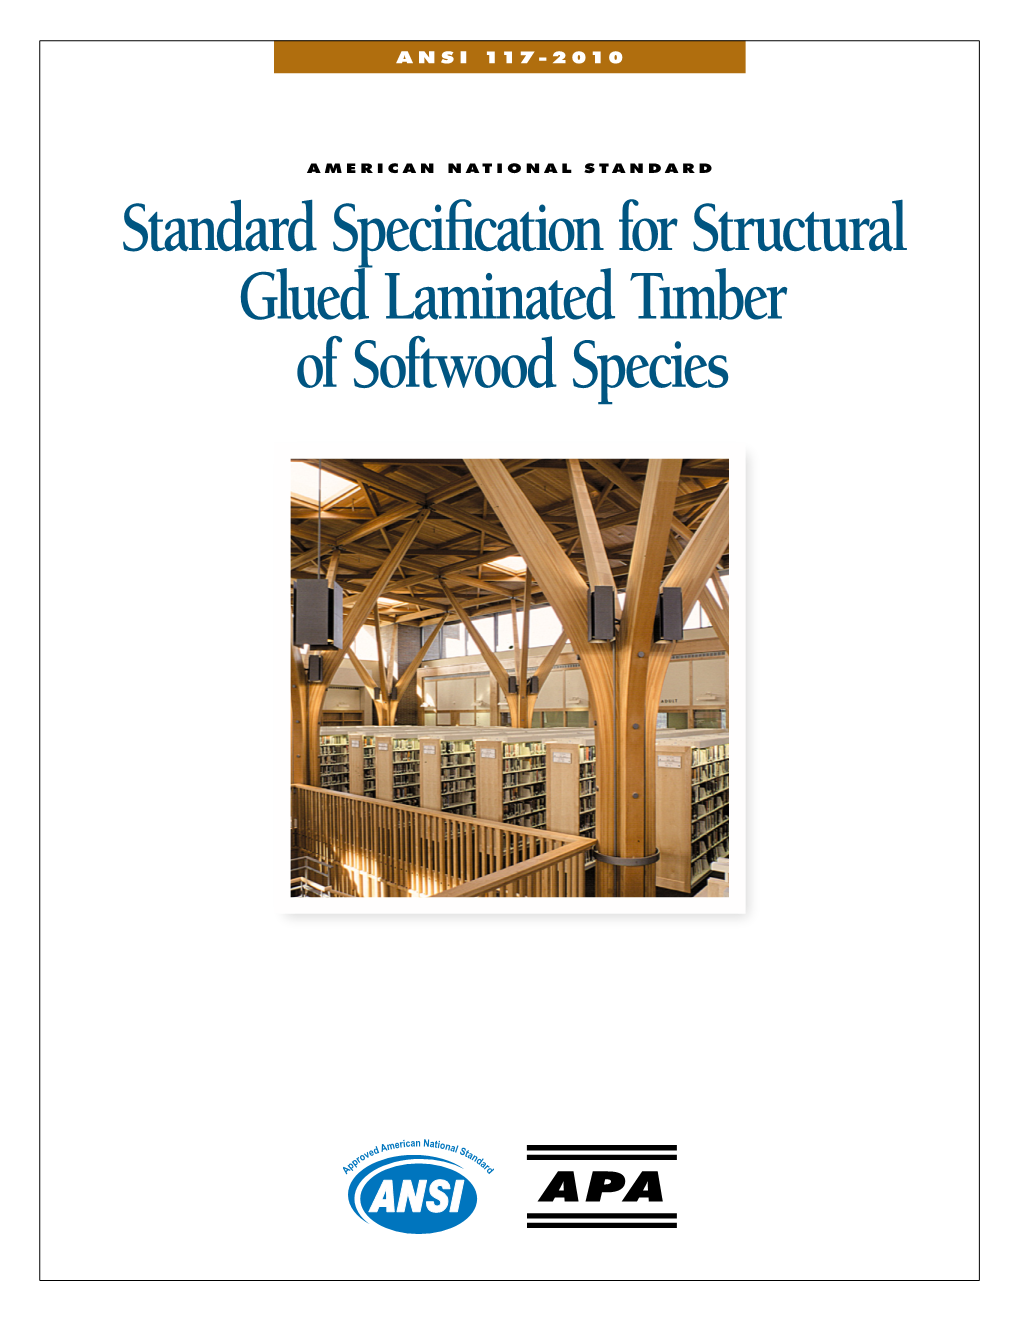 Standard Specification for Structural Glued Laminated Timber of Softwood Species